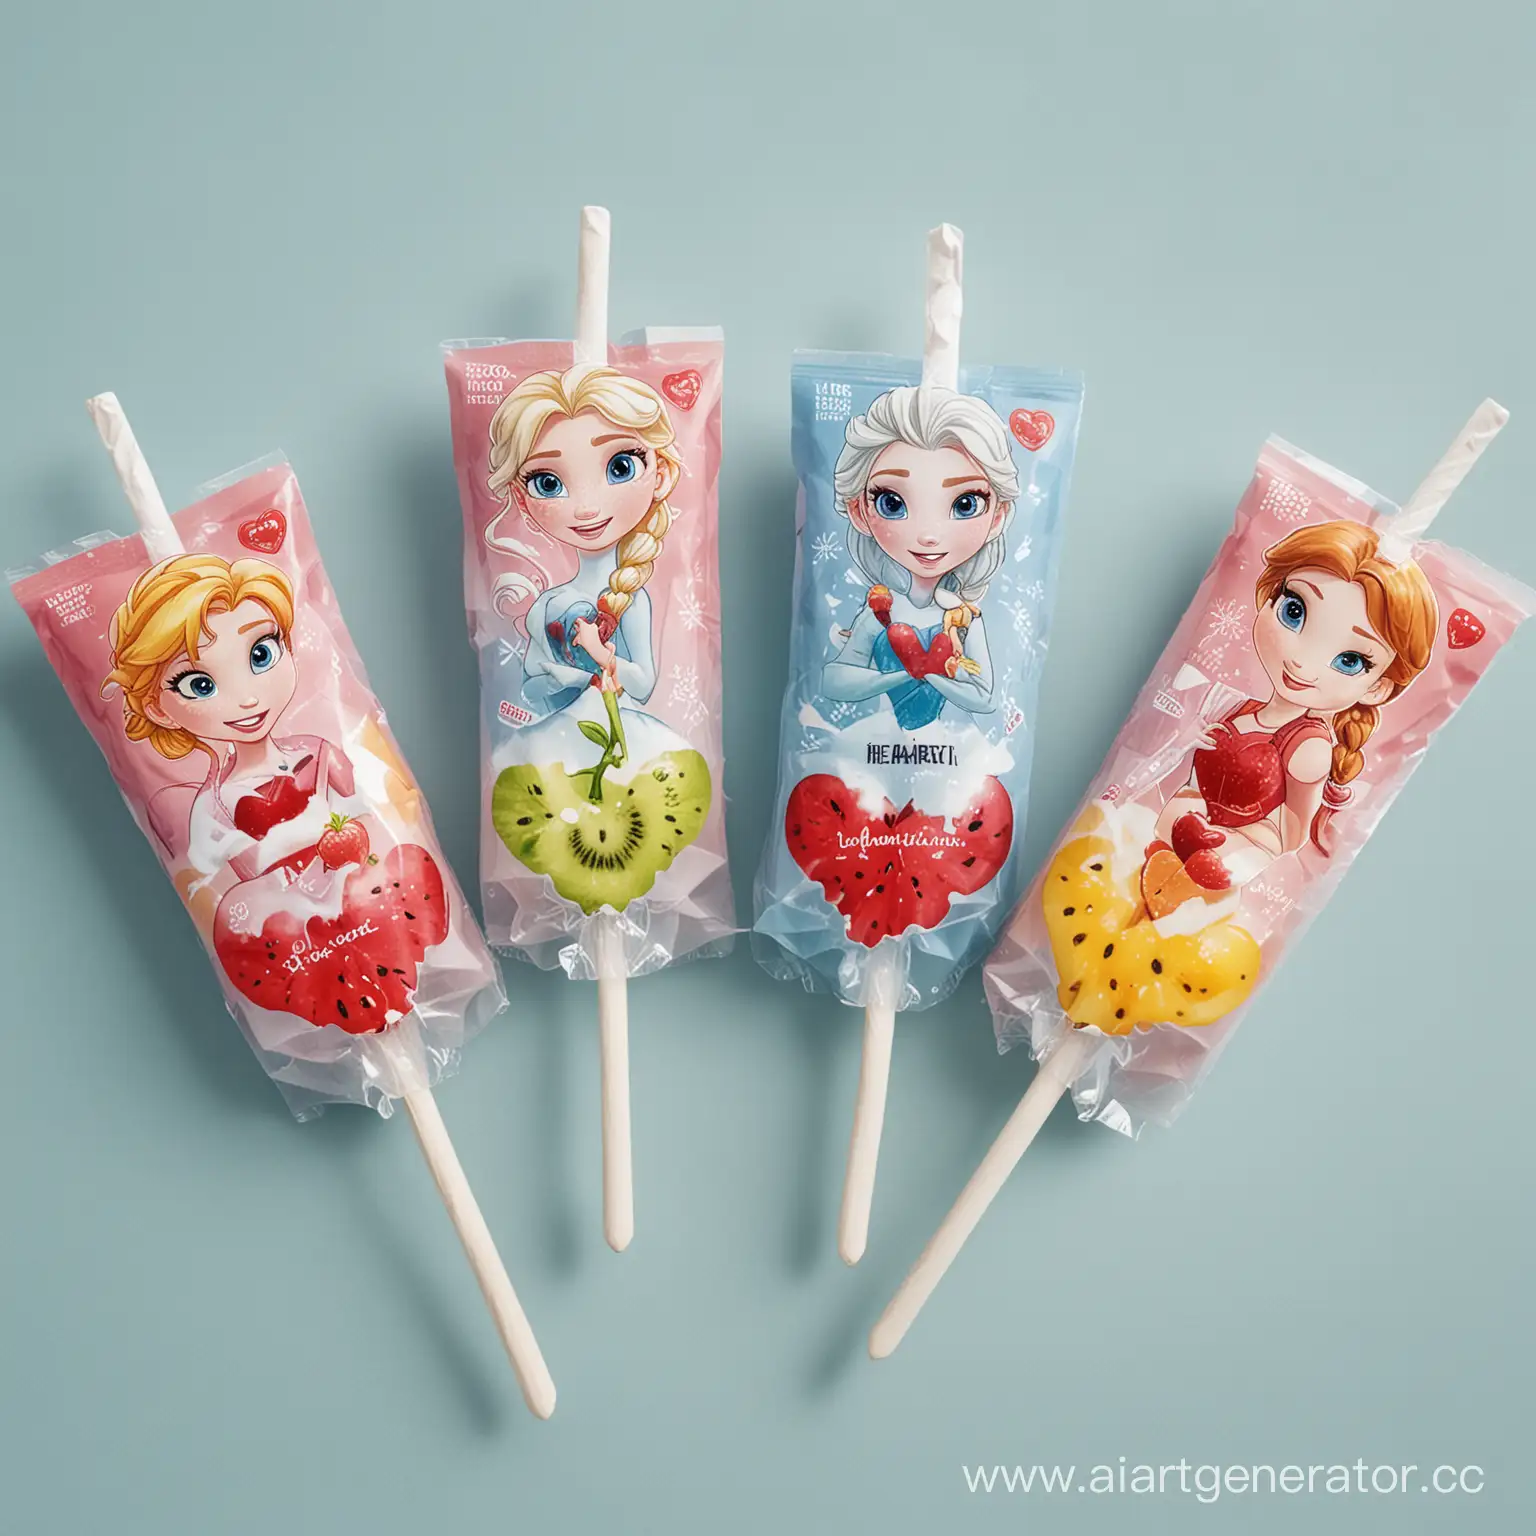 Summer packaging for Icy Heart brand of fruit ice on a stick with characters from the cartoon Frozen heart